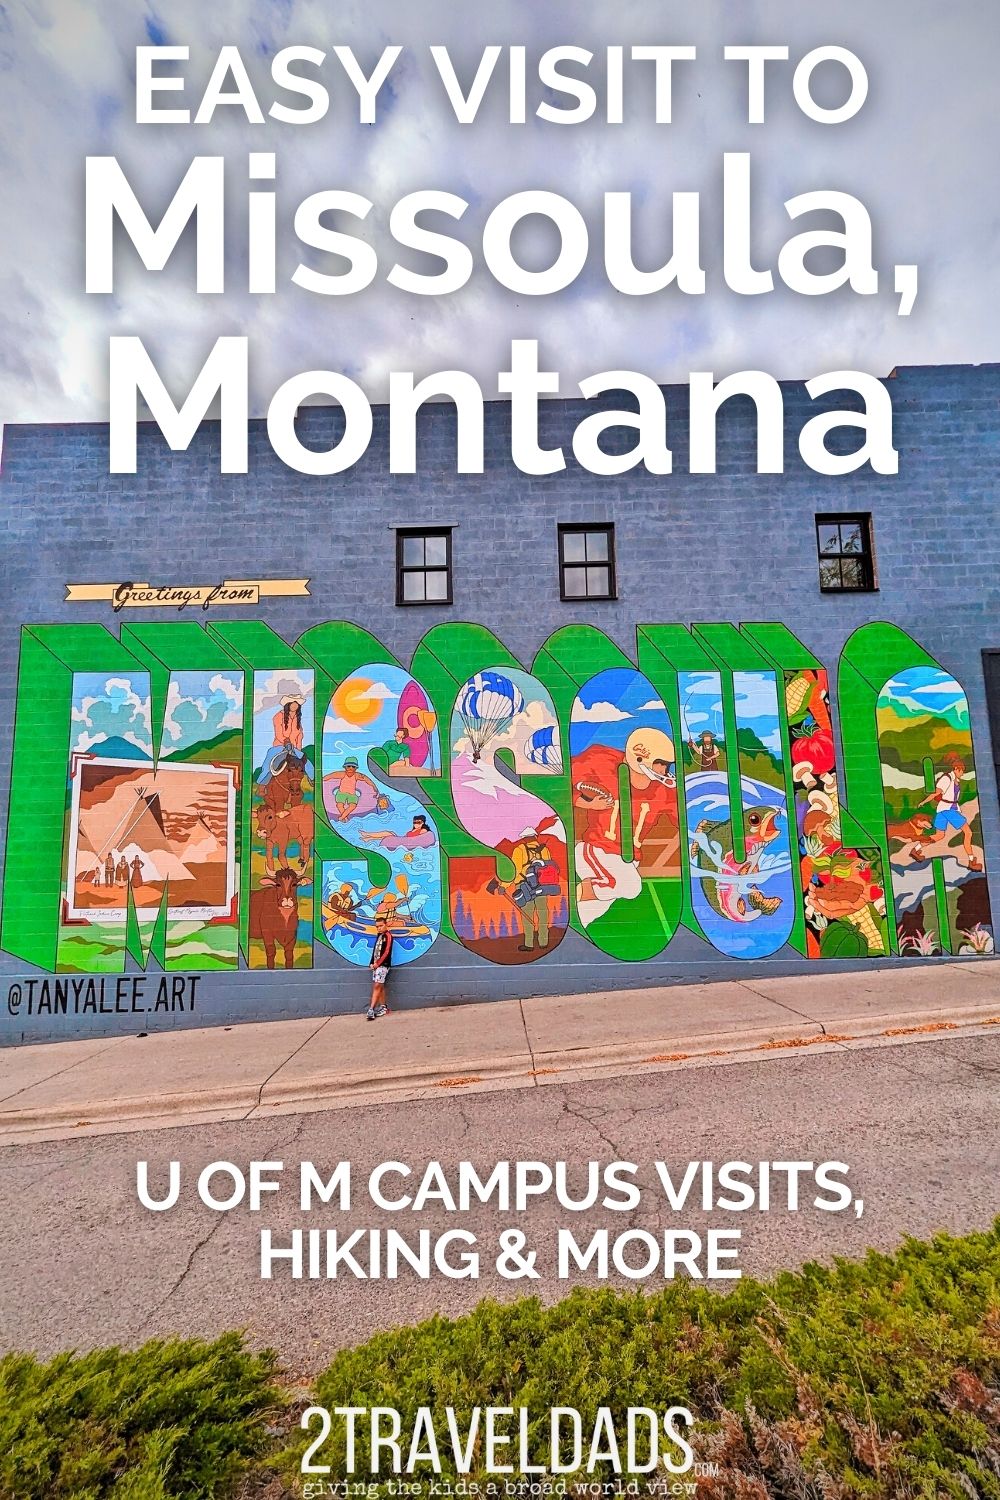 As a gateway to the Rocky Mountains, there are lots of things to do in Missoula that are easy and free. From hiking to markets, we've picked the best activities in Missoula for a short visit.